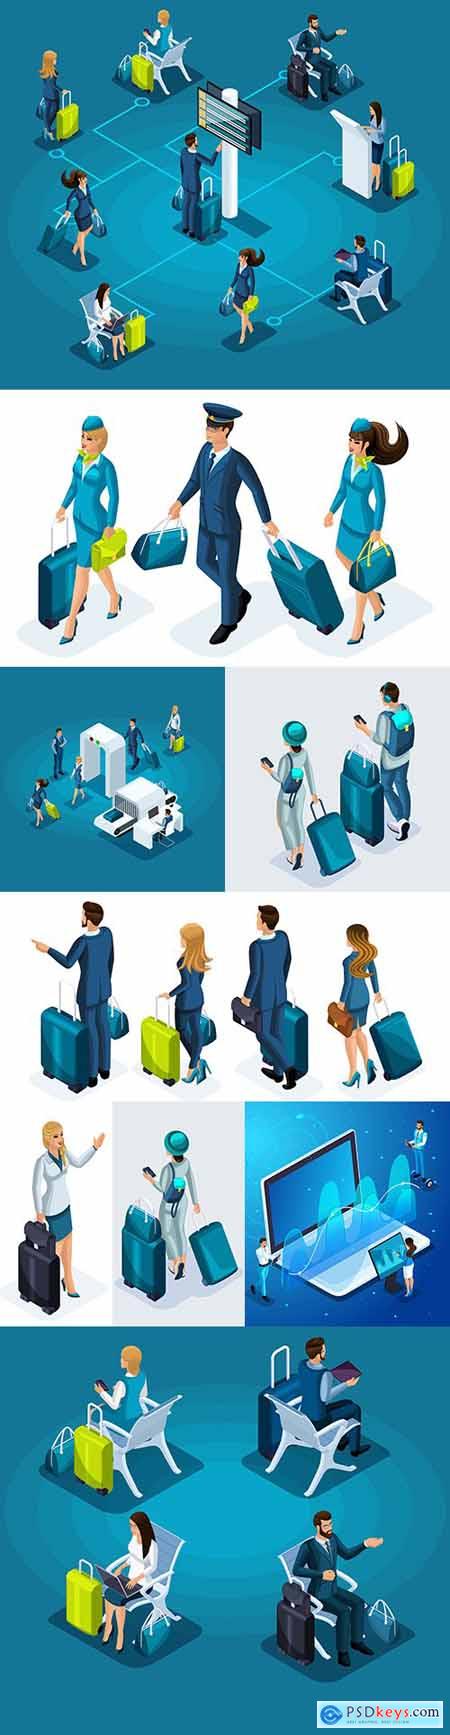 Girl and man at airport with suitcases isometric illustrations